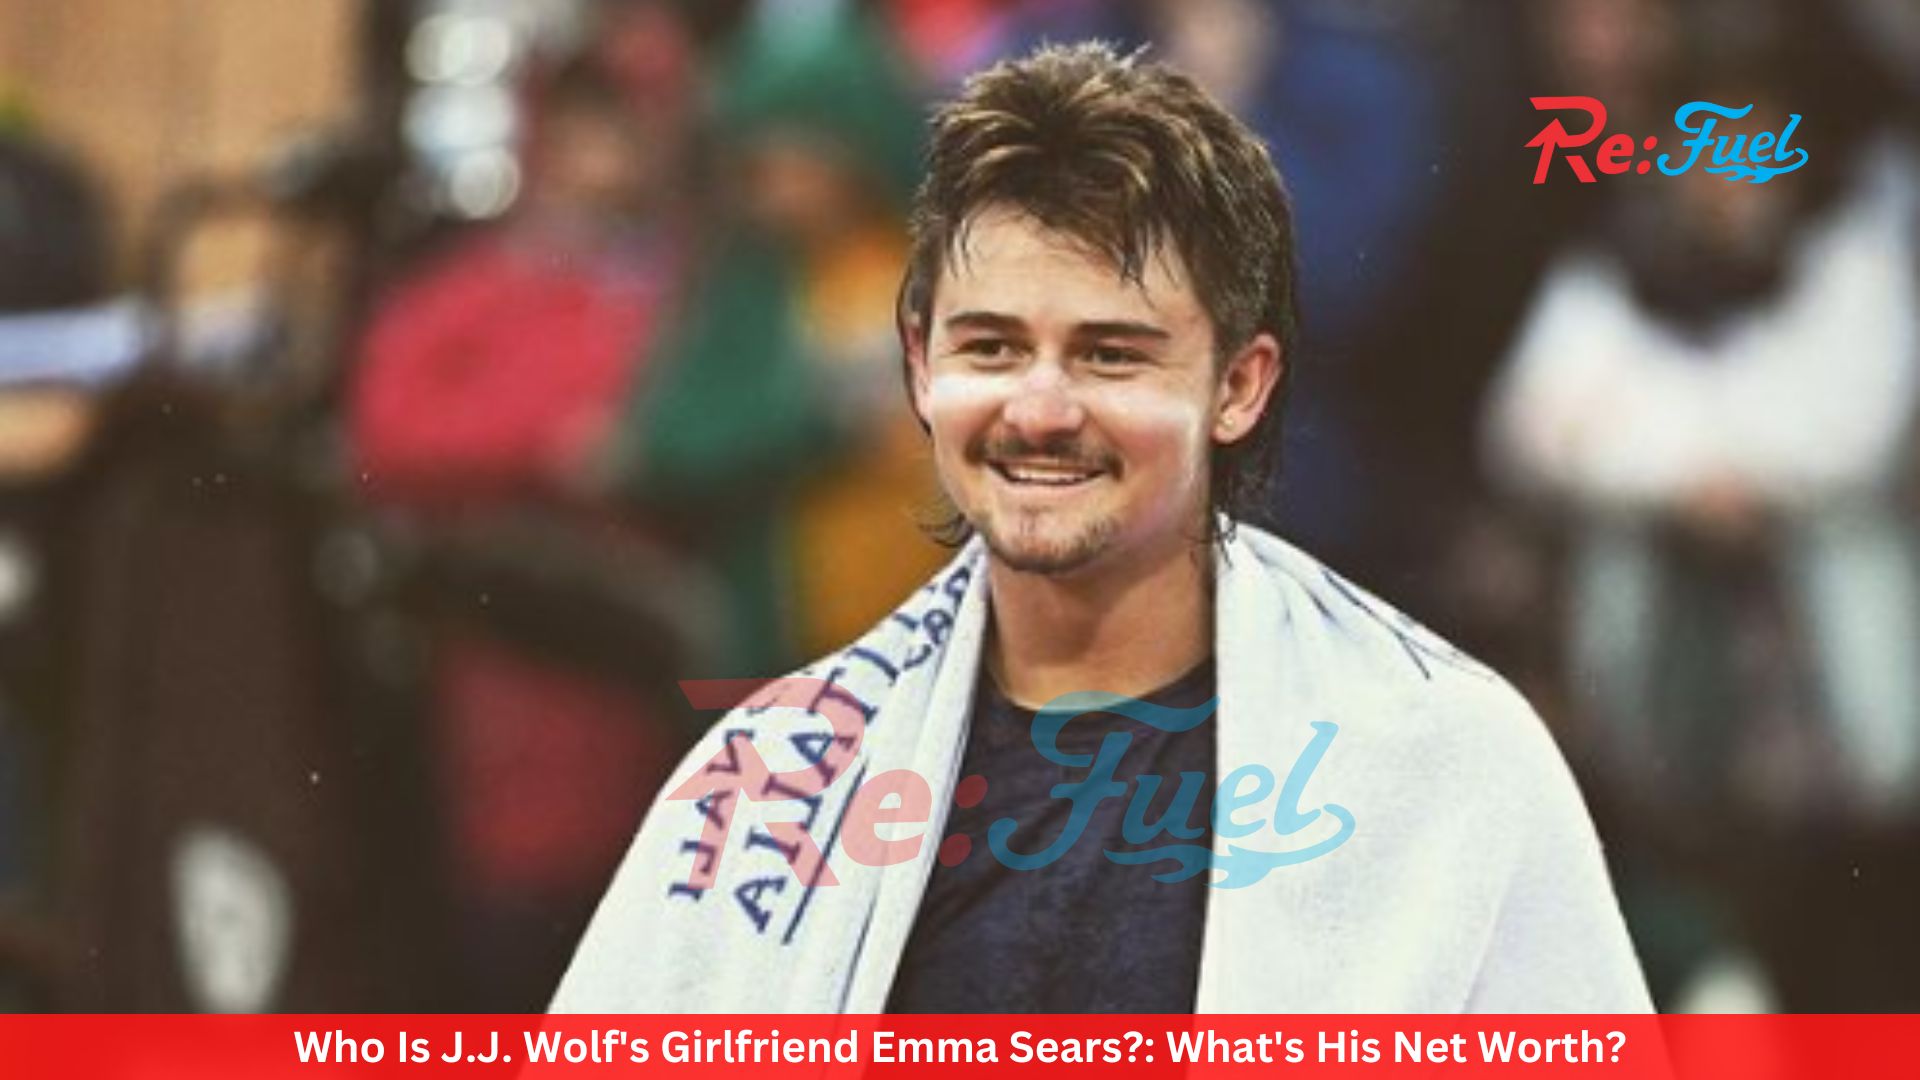 Who Is J.J. Wolf's Girlfriend Emma Sears?: What's His Net Worth?